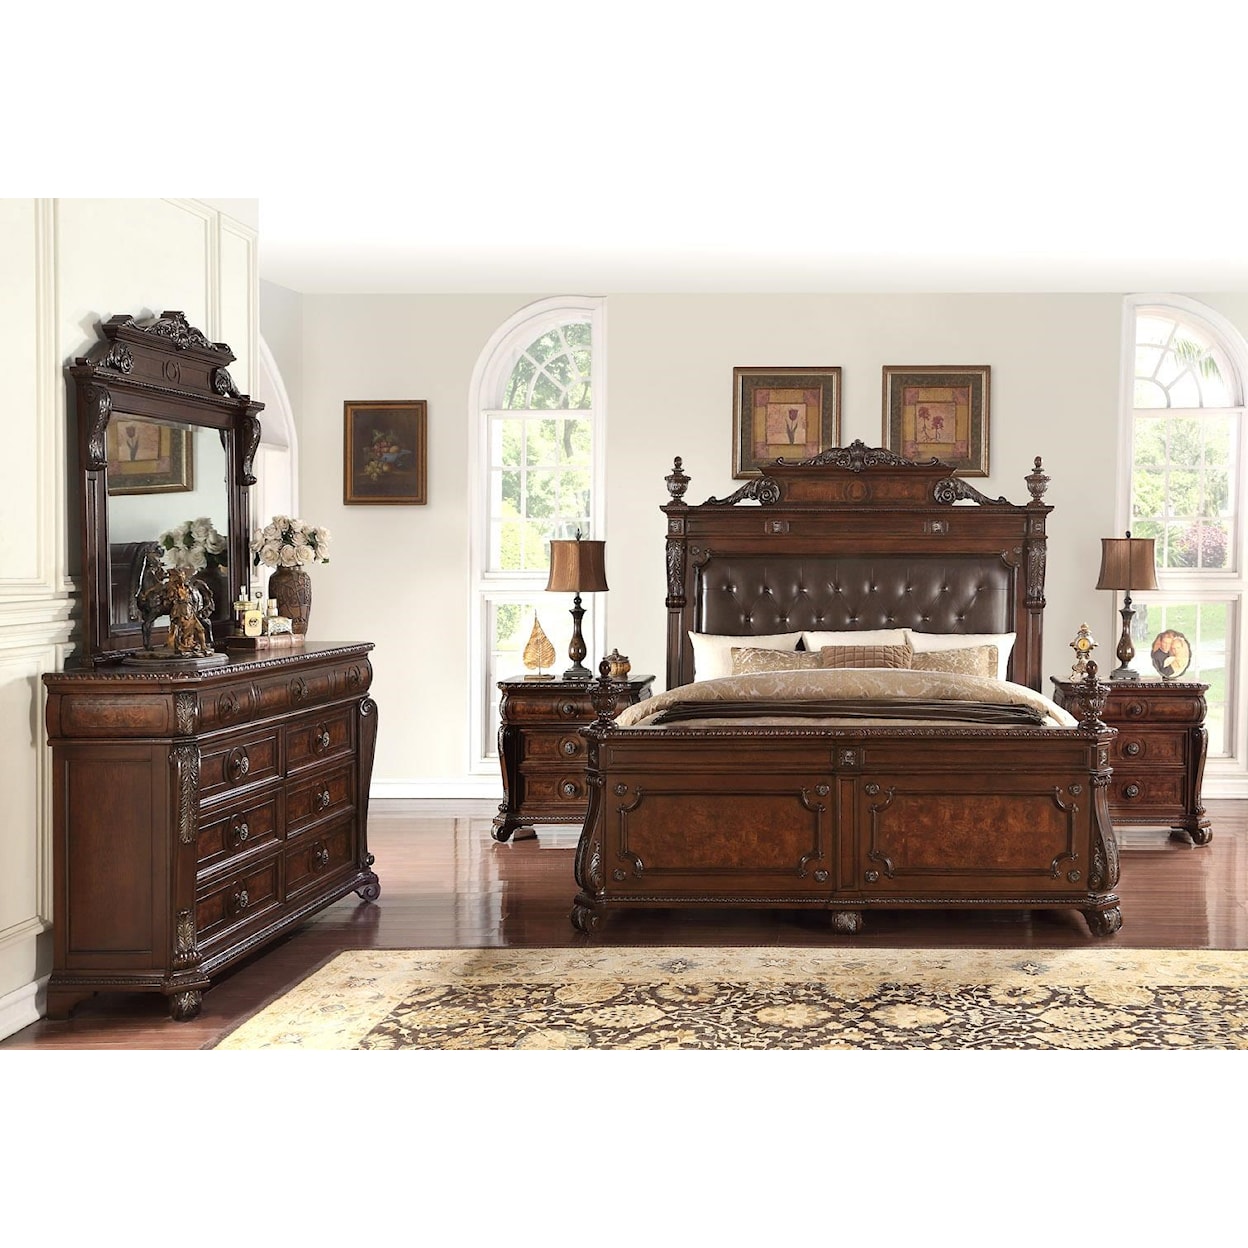 Home Insights Vintage King 5 Piece Bedroom Group